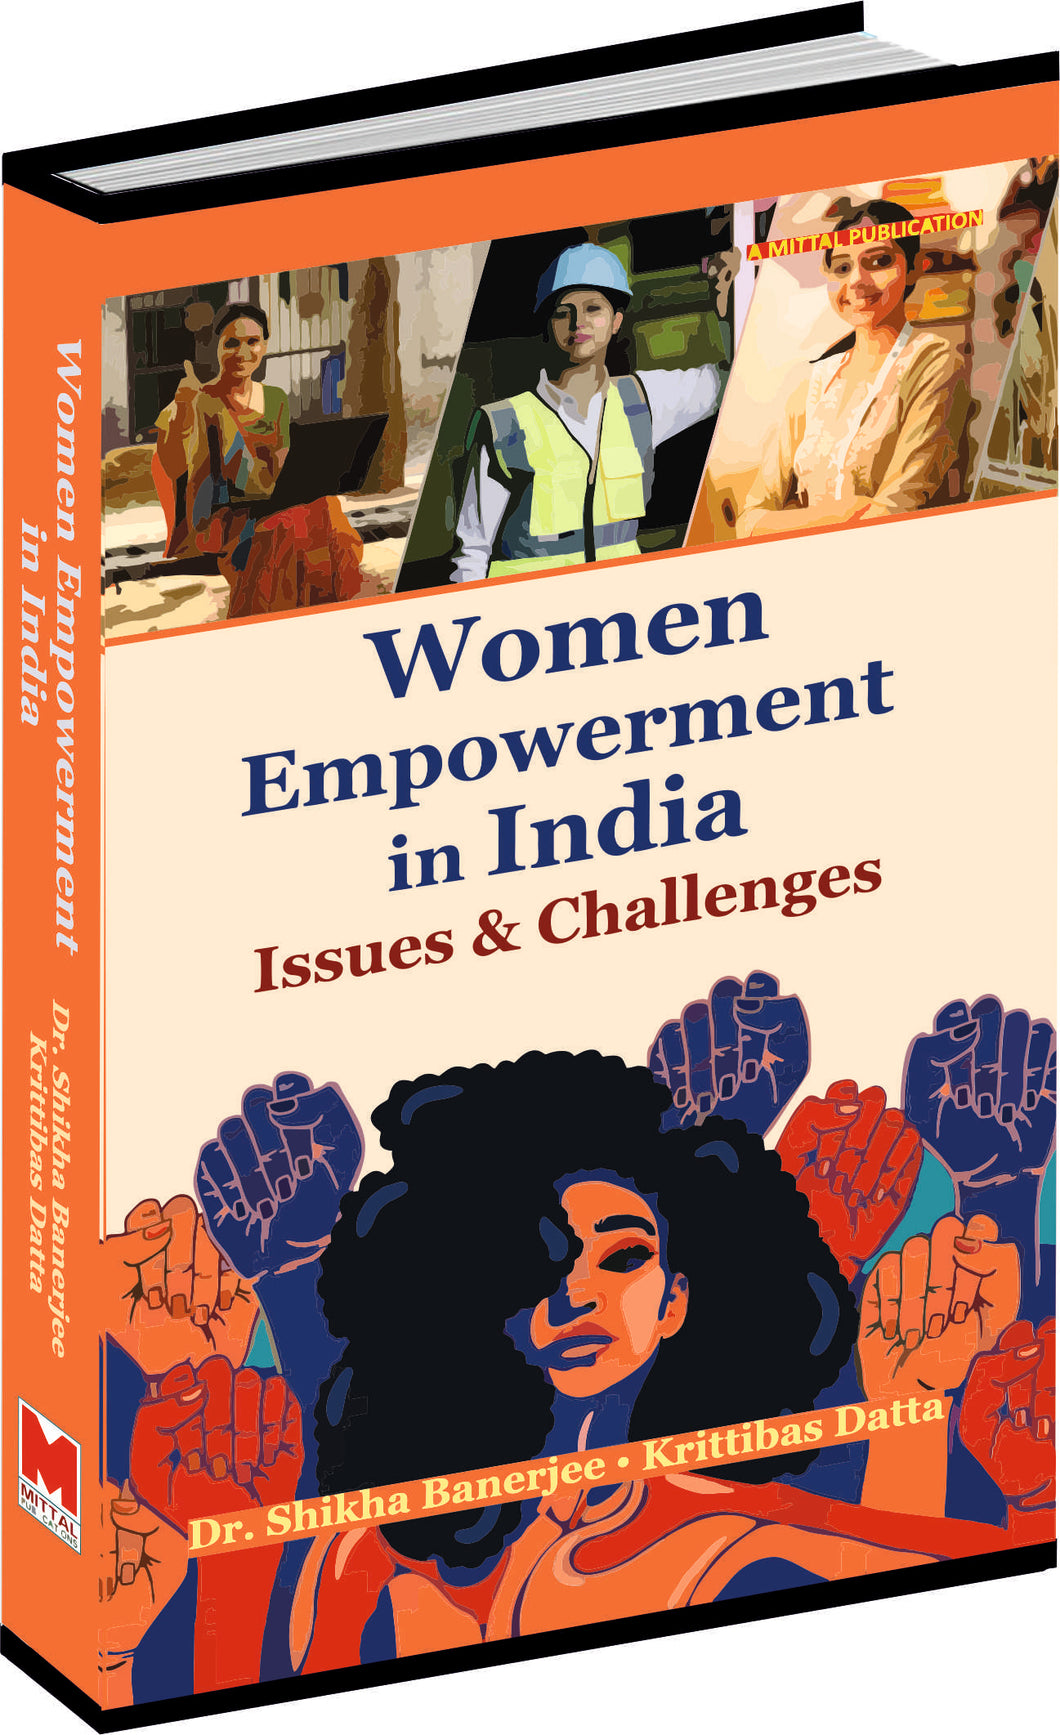 Women Empowerment in India: Issues and Challenges by Dr. Shikha Banerjee And Krittibas Datta